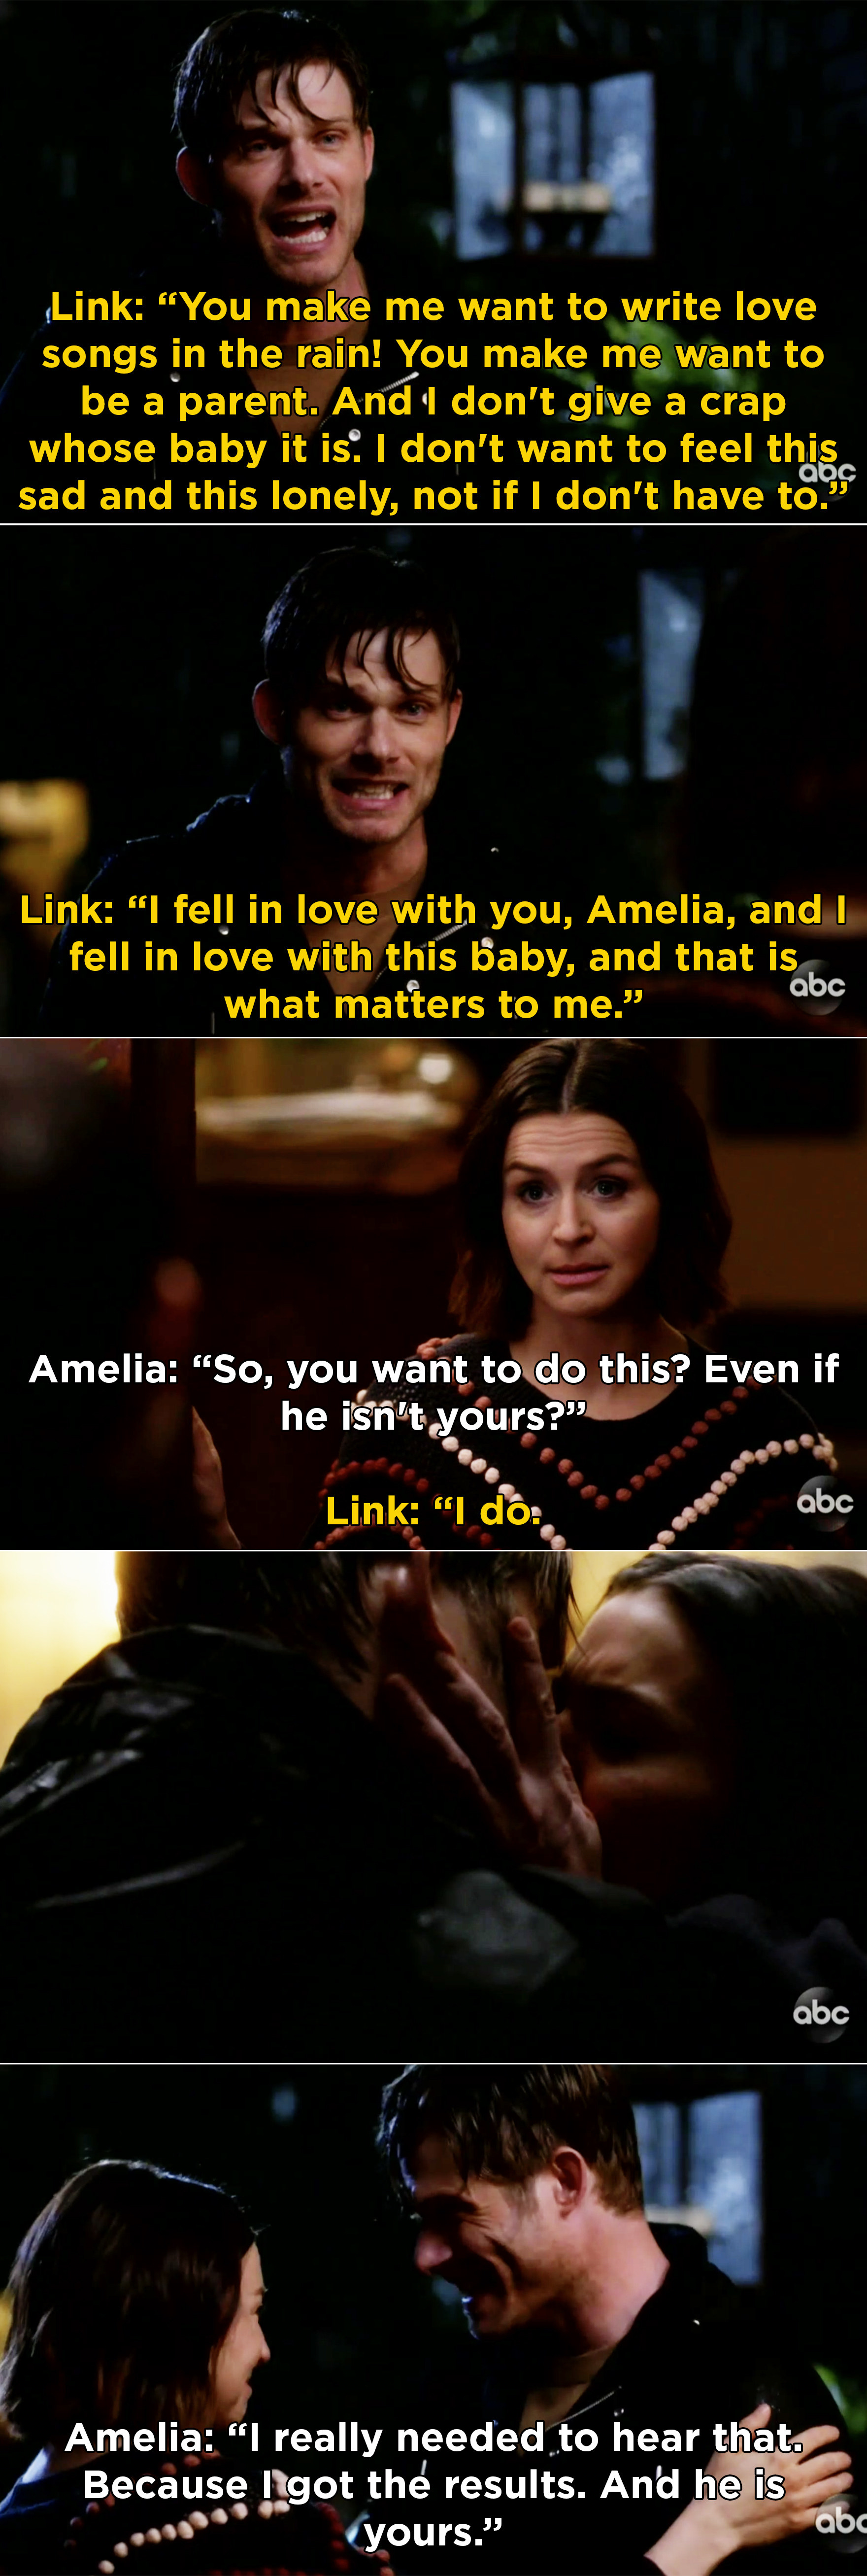 Link saying that he wants to be with Amelia no matter what and Amelia saying that the baby is his